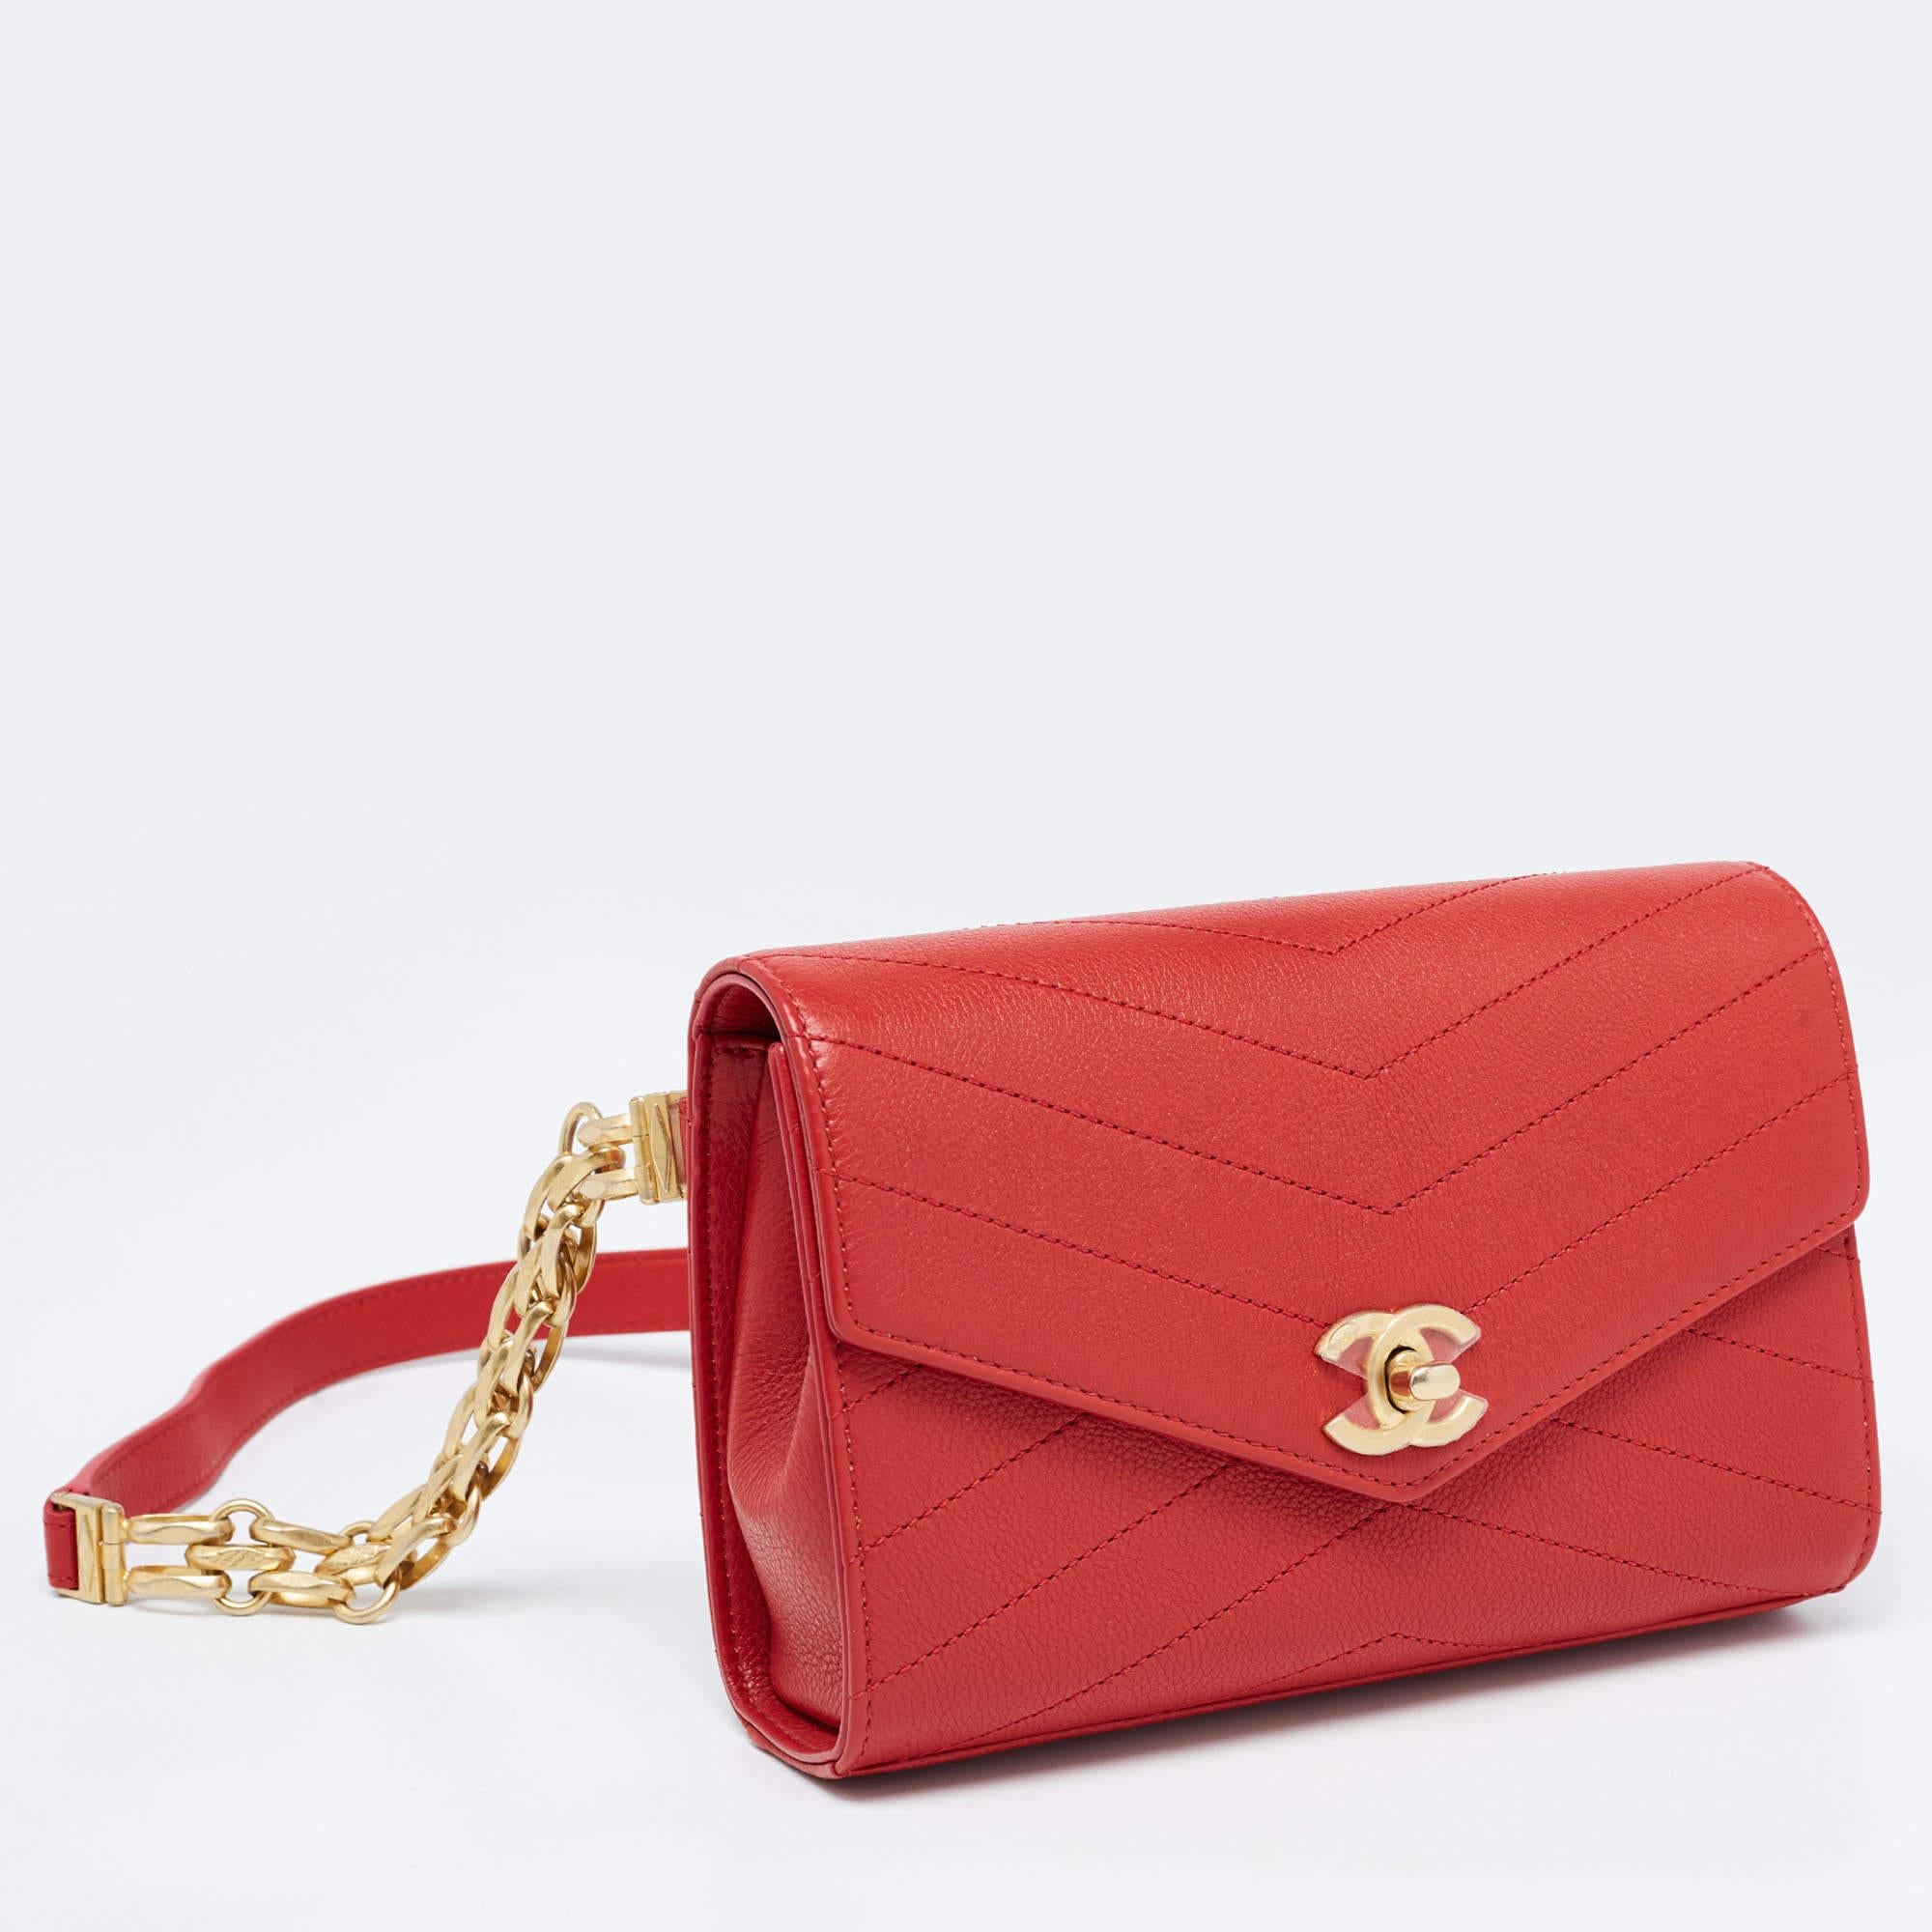 Women's Chanel Red Chevron Leather Coco Waist Belt Bag For Sale